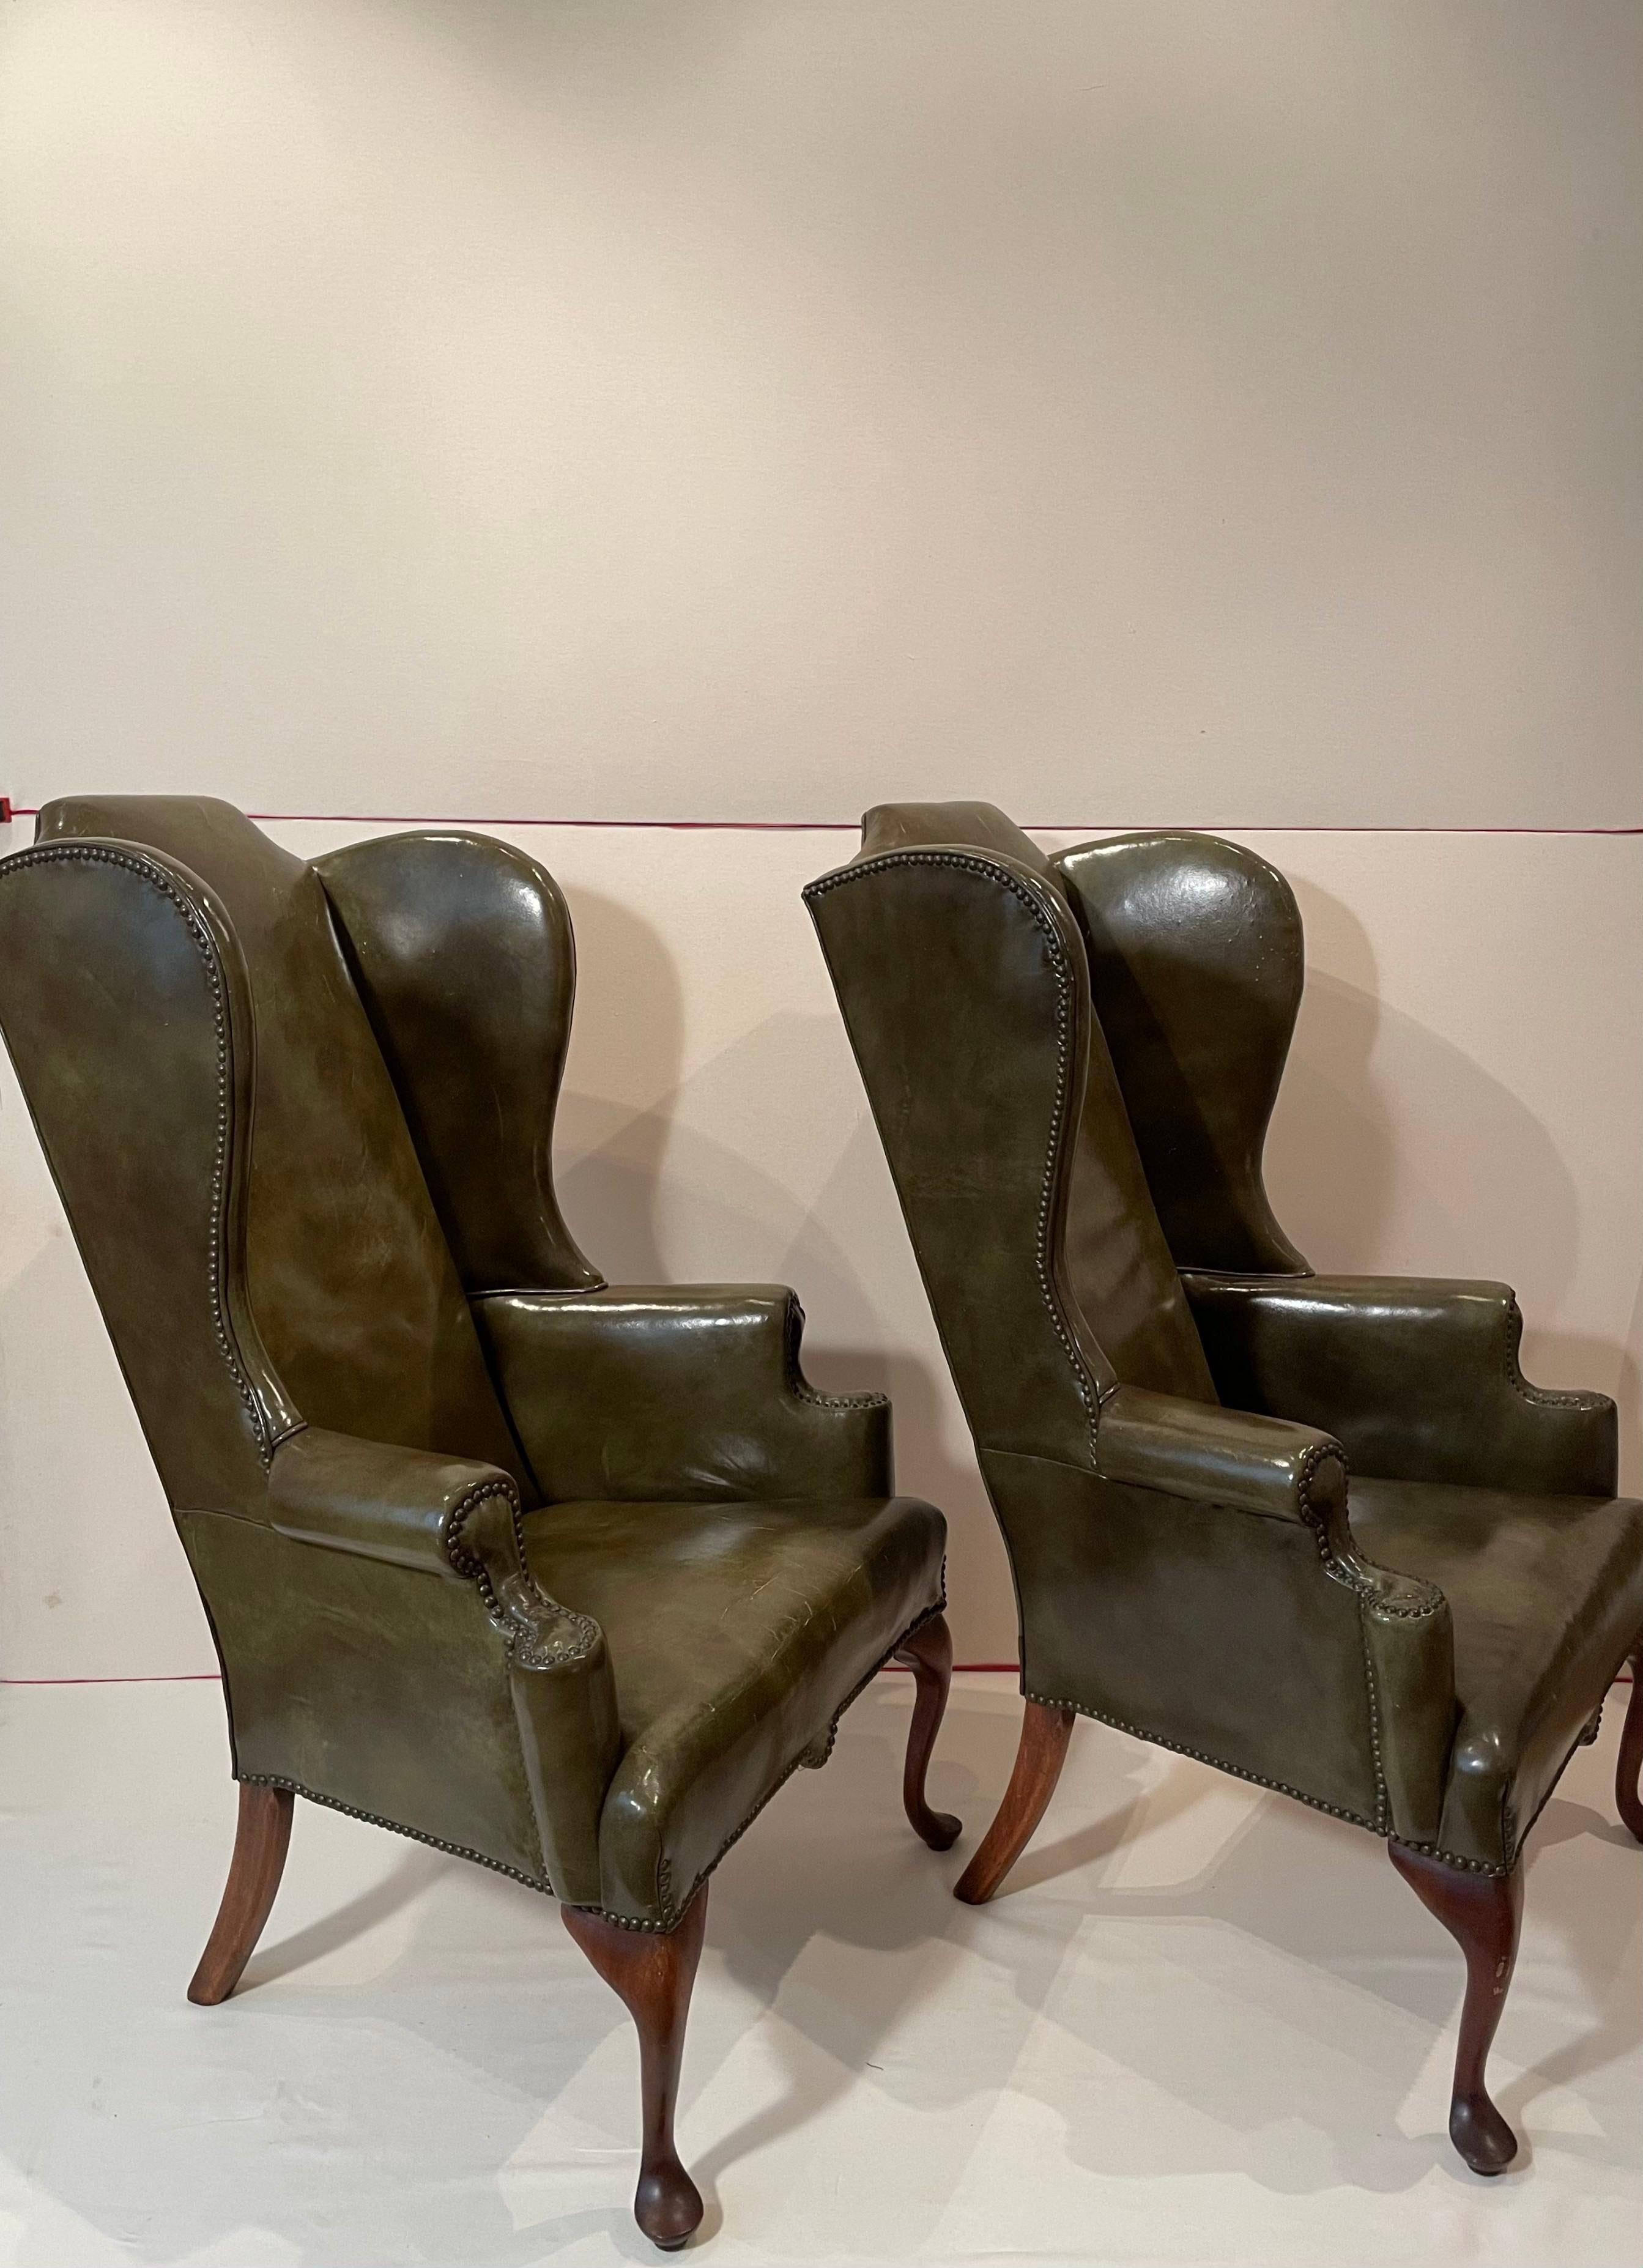 A lovely pair of Late 19th century English wingback chairs with walnut legs (Cabriole legs in the front and saber legs in the back), brass nail heads, and olive green upholstery by 